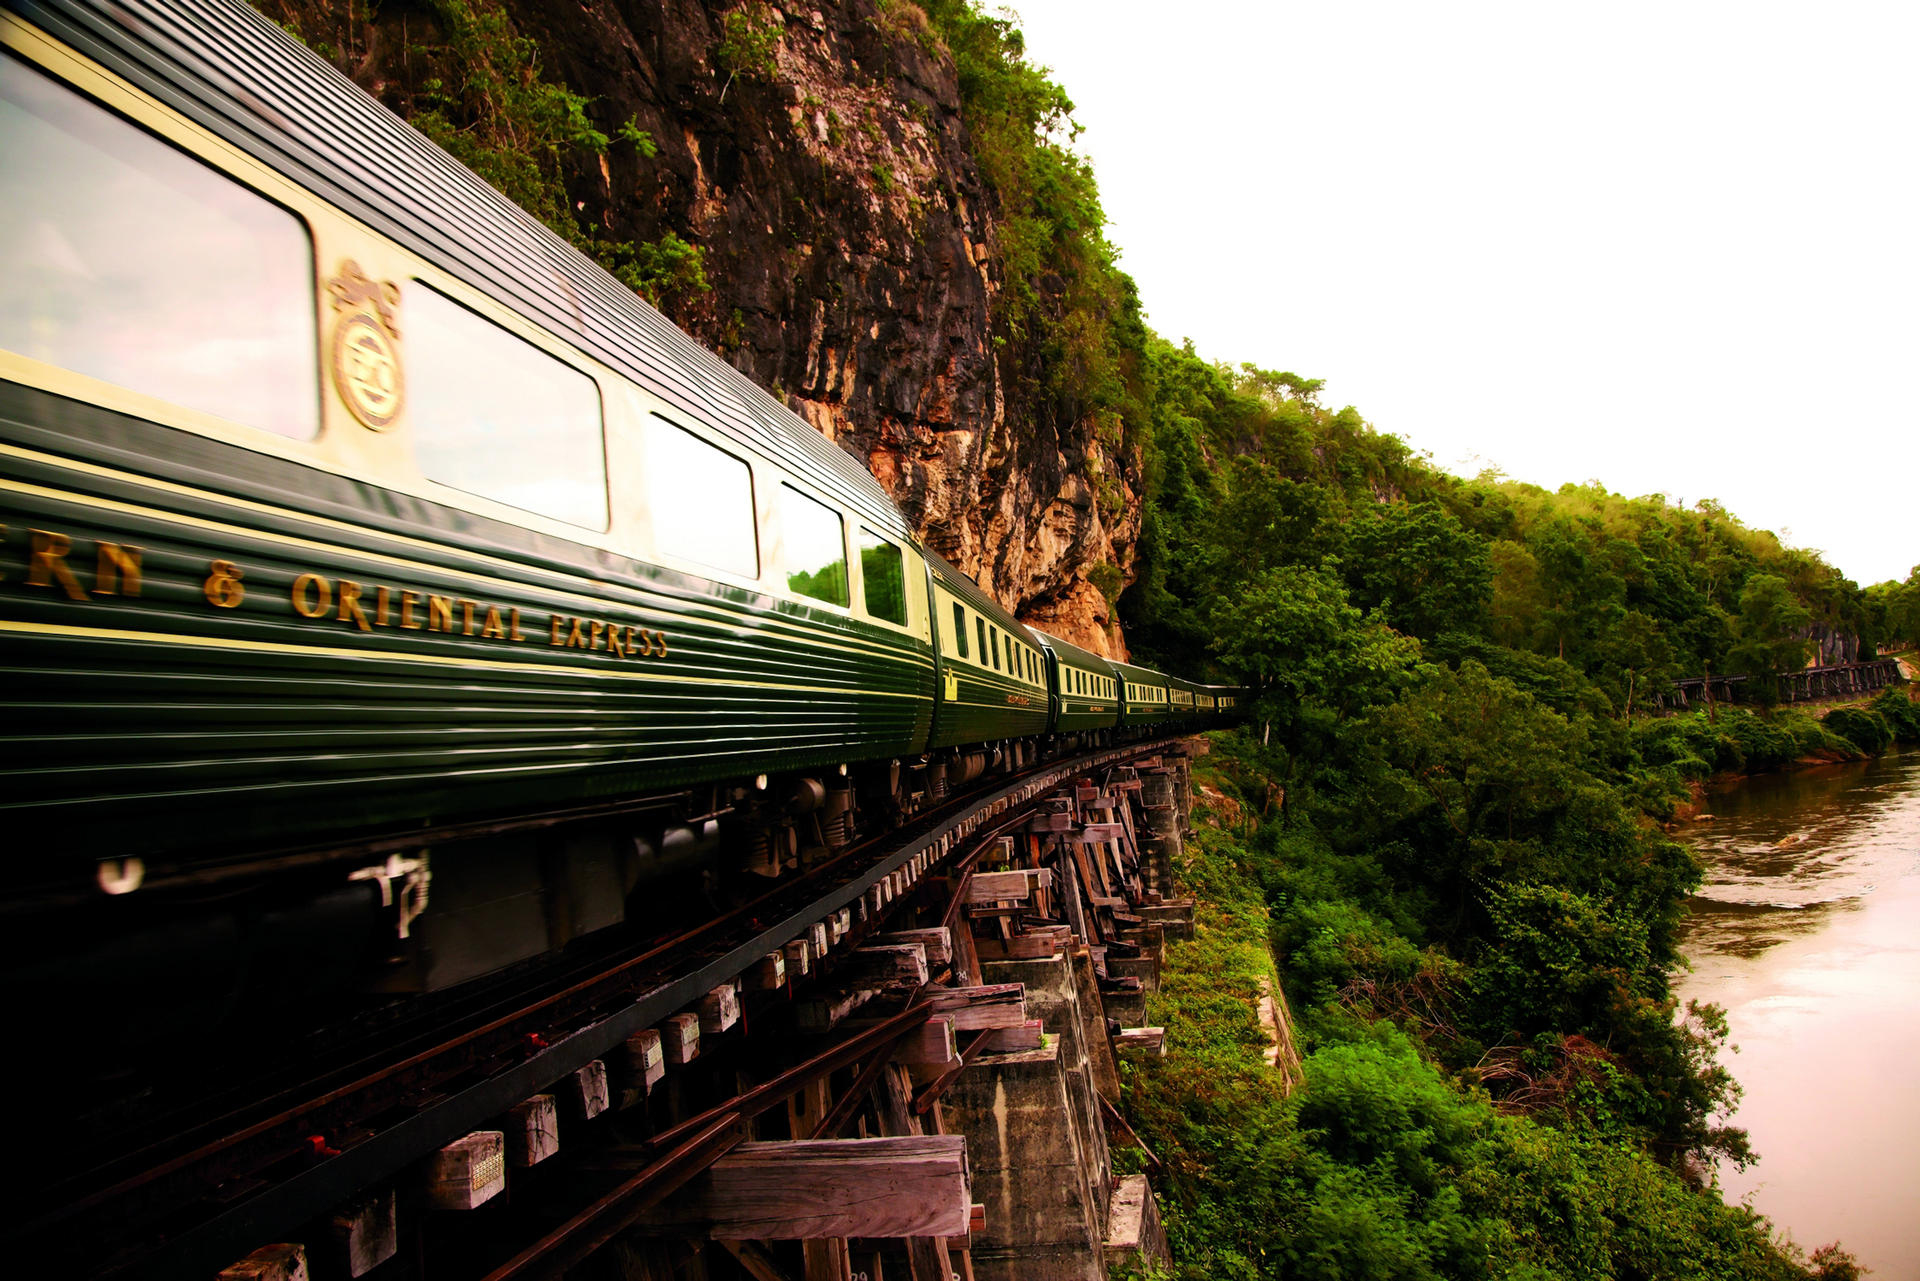 Belmond, with its recent merging with the famed Orient Express, now operates the famous routes including the Venice Simplon-Orient-Express and the Eastern and Oriental Express in Southeast Asia.